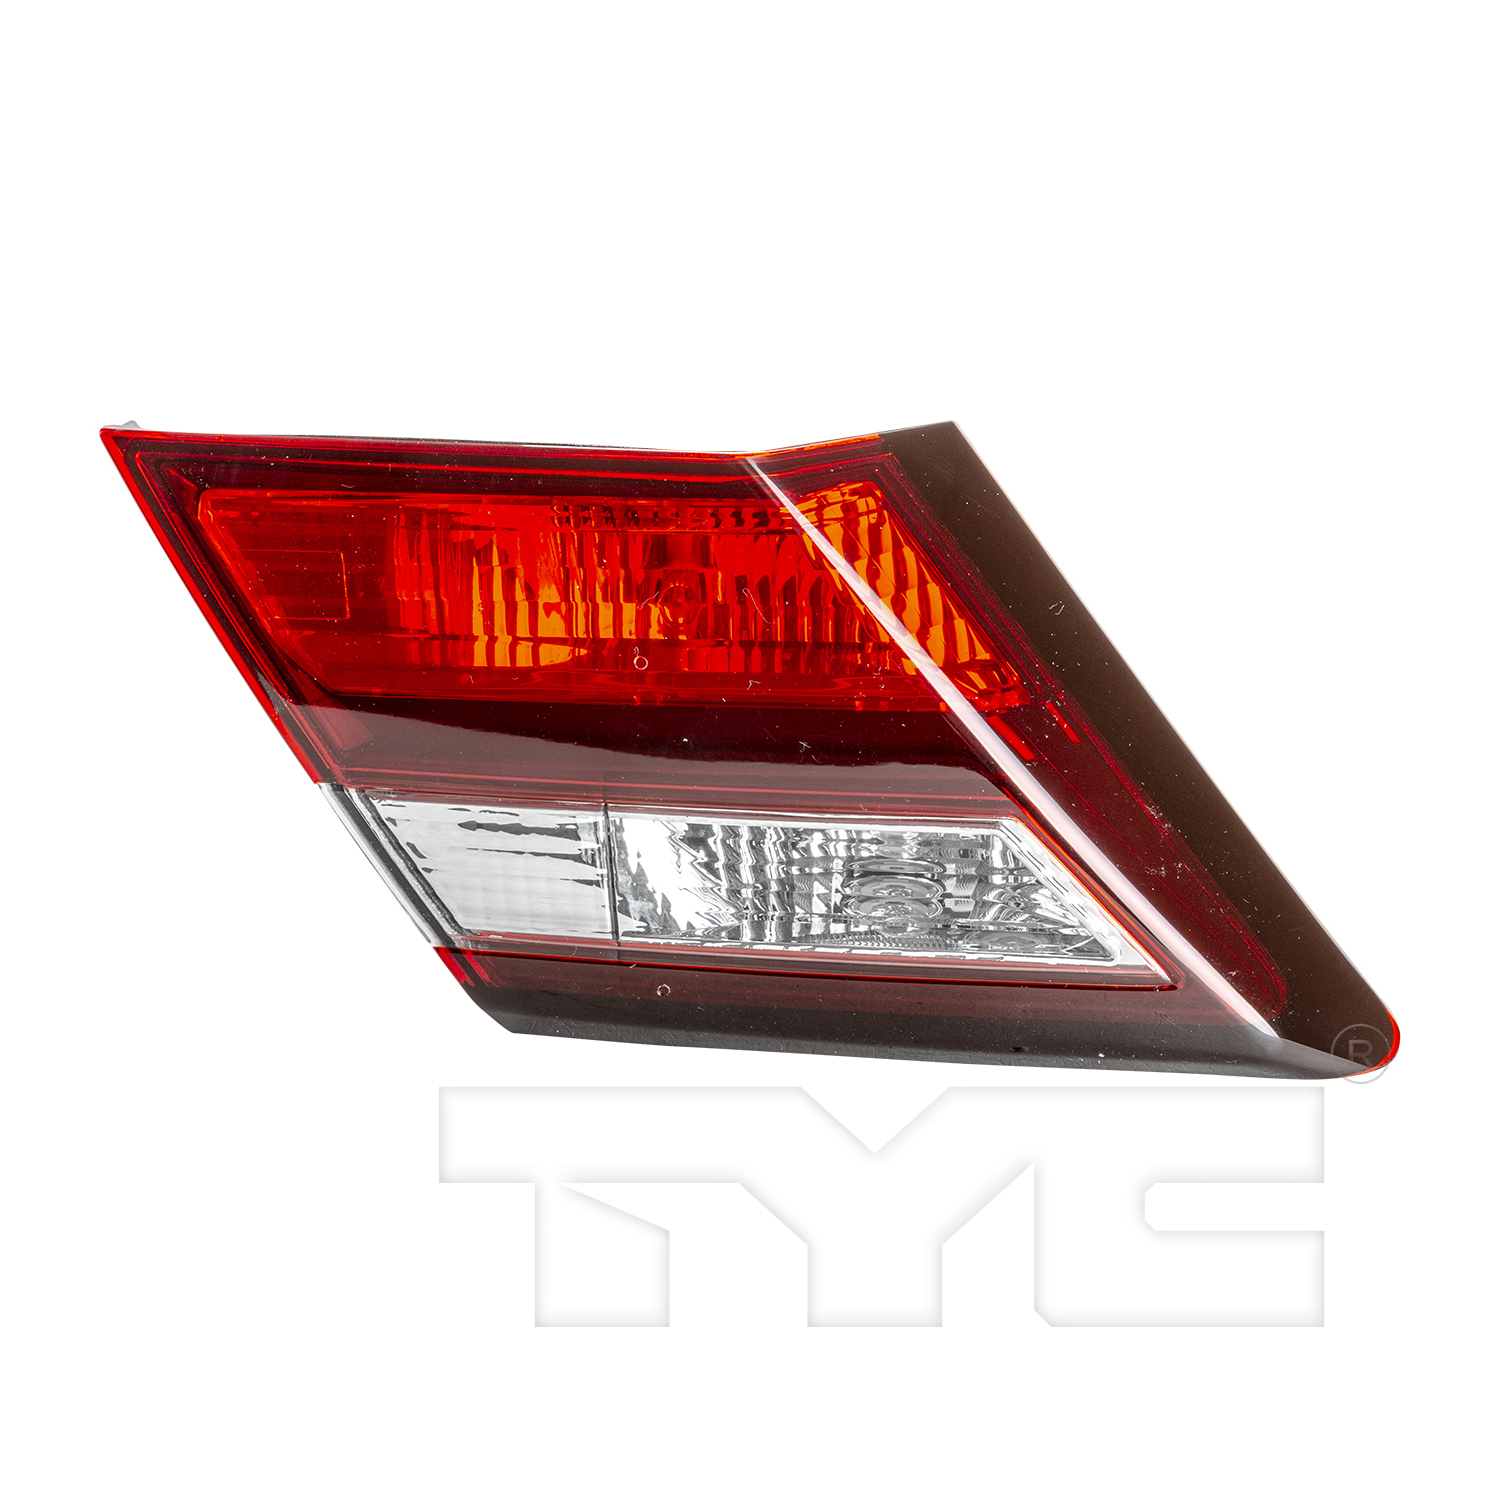 Aftermarket TAILLIGHTS for HONDA - CIVIC, CIVIC,13-15,LT Taillamp assy inner